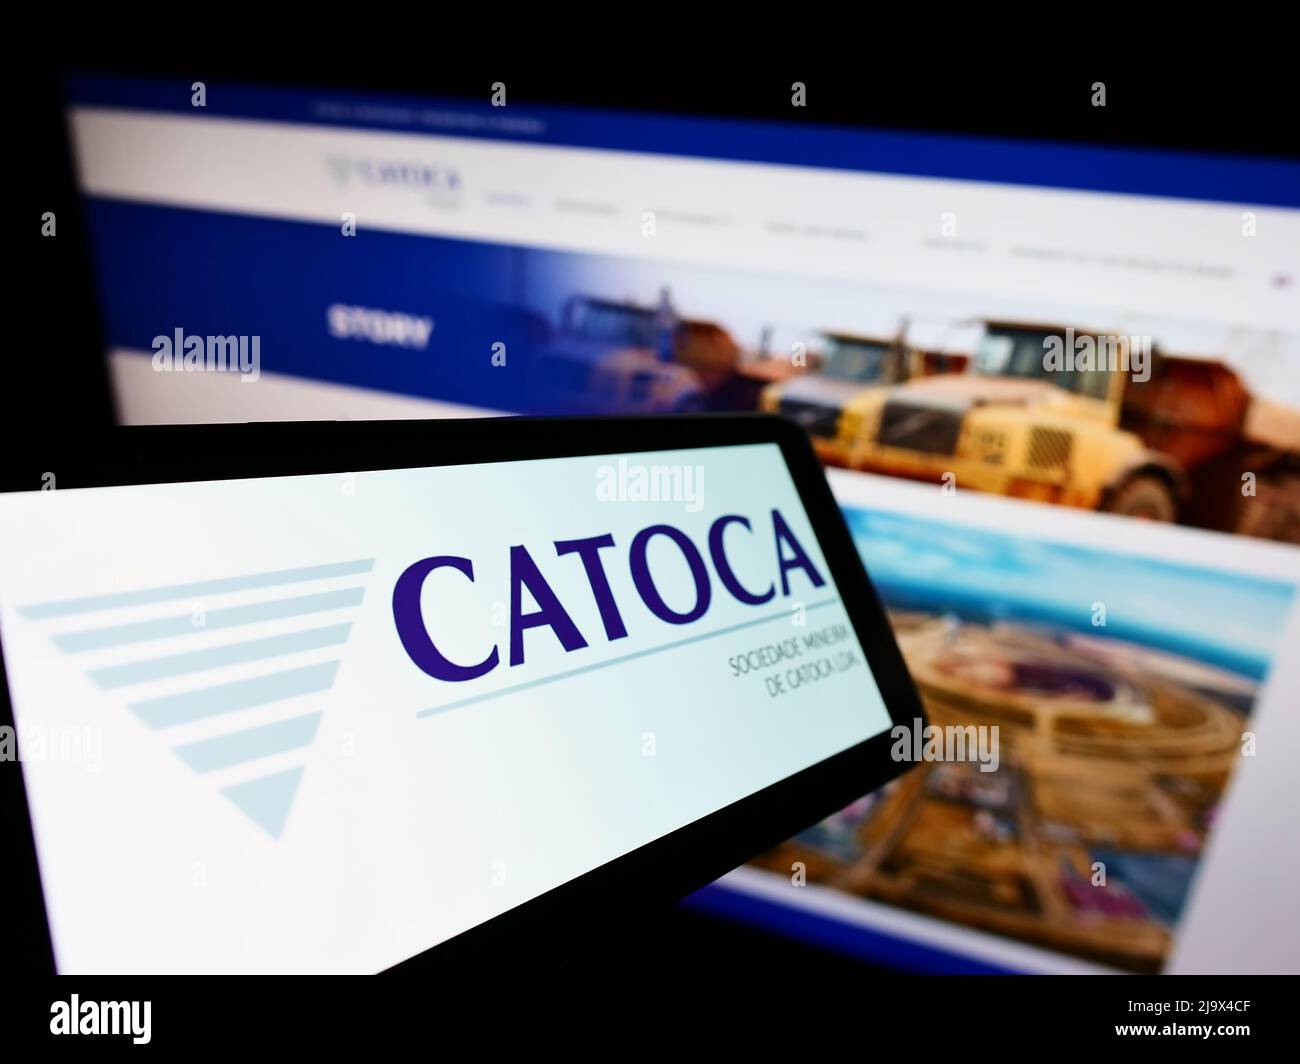 Smartphone with logo of mining company Sociedade Mineira de Catoca Lda. on screen in front of business website. Focus on center of phone display. Stock Photo